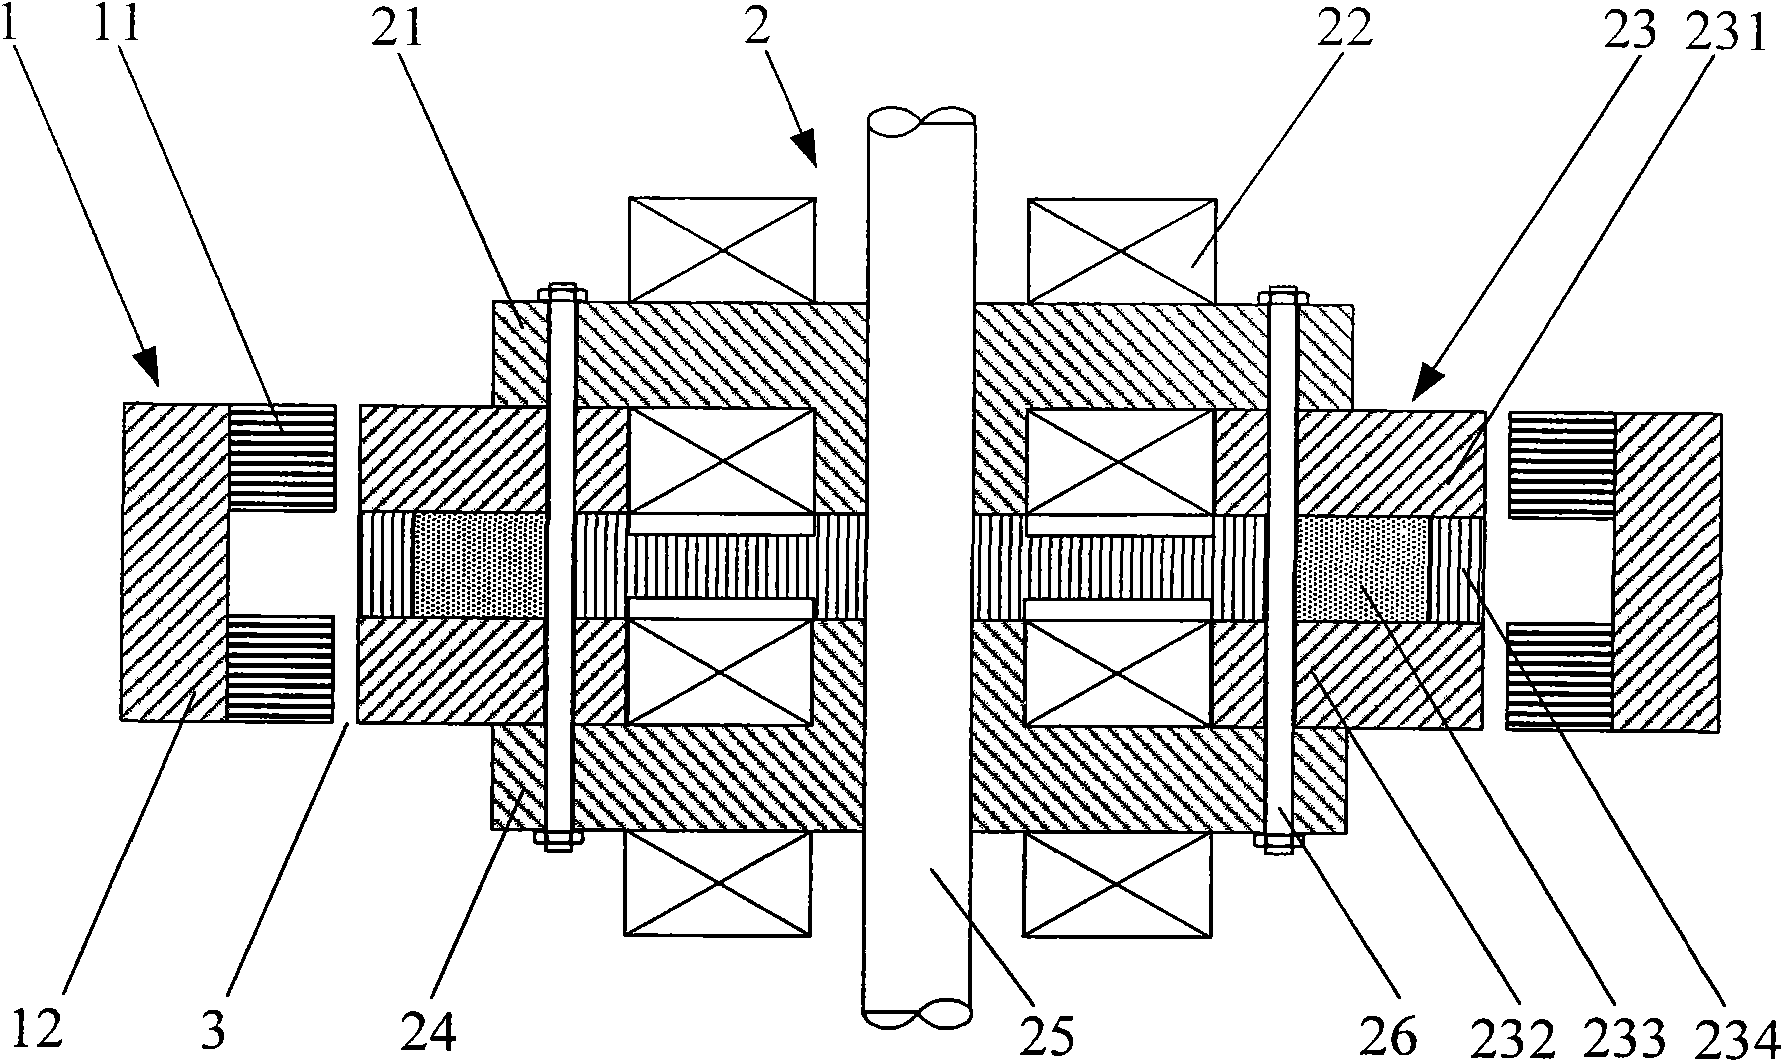 Mixed magnetic bearing with horizontal-coil uniform radial pole and low-loss outer rotor